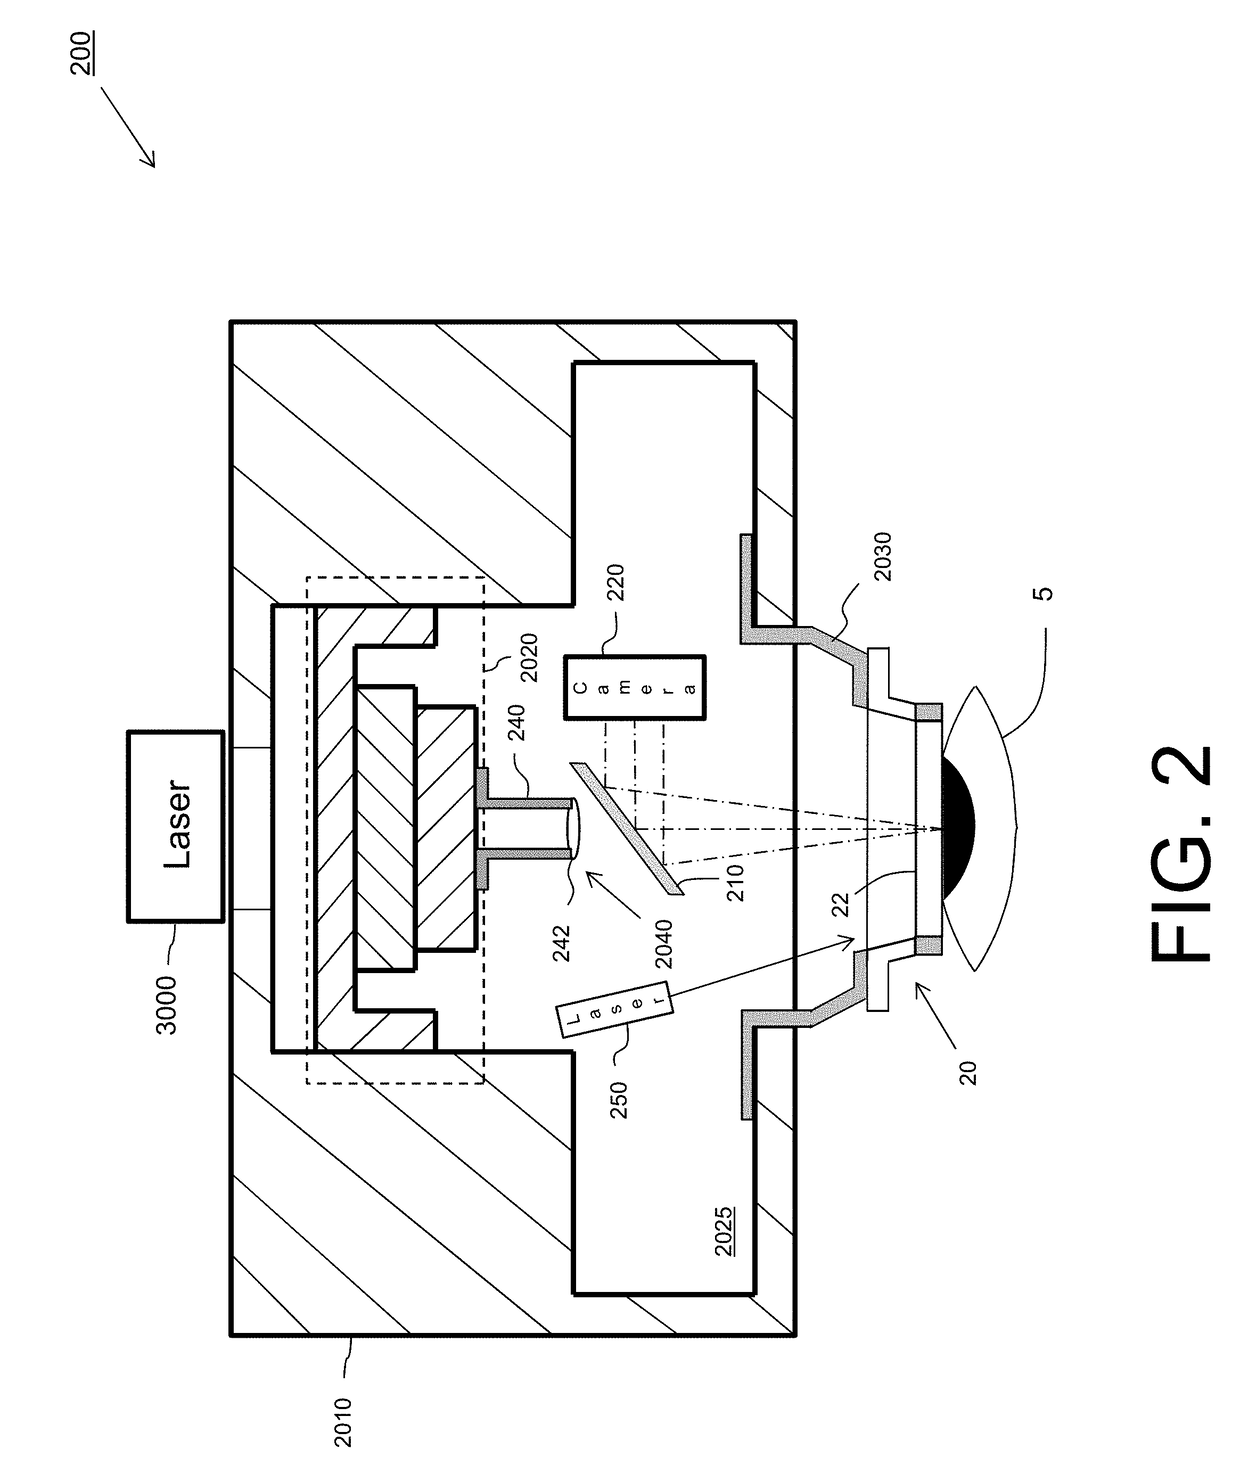 Patient interface device for laser eye surgery having light guiding structure for illuminating eye